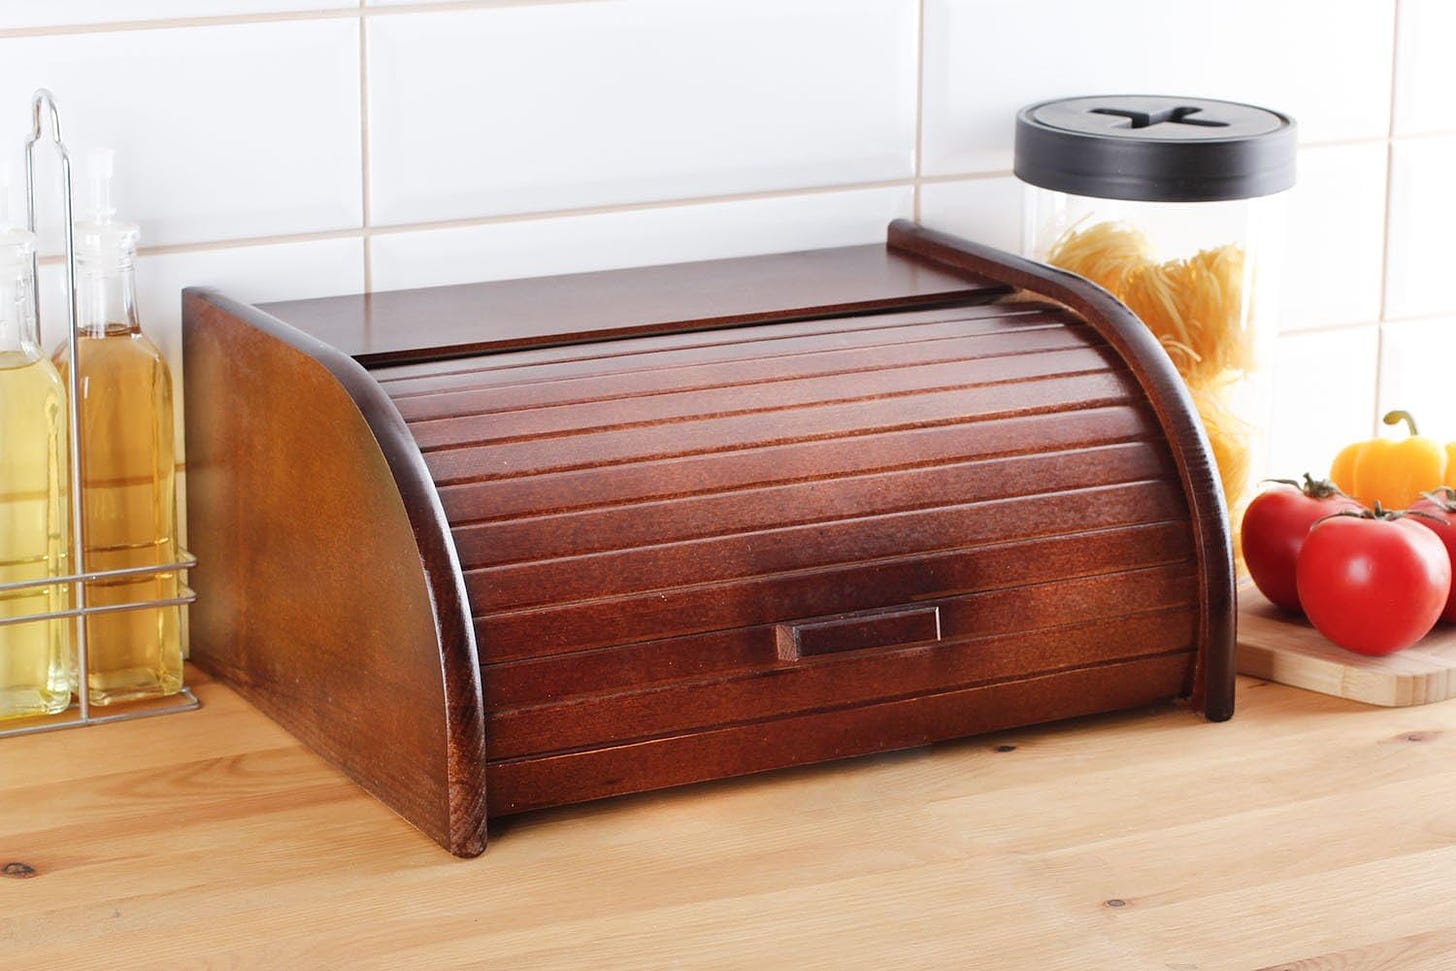 Wooden Bread Bin with Roll Top or Drop Down Door Box for Storage Loaf ...